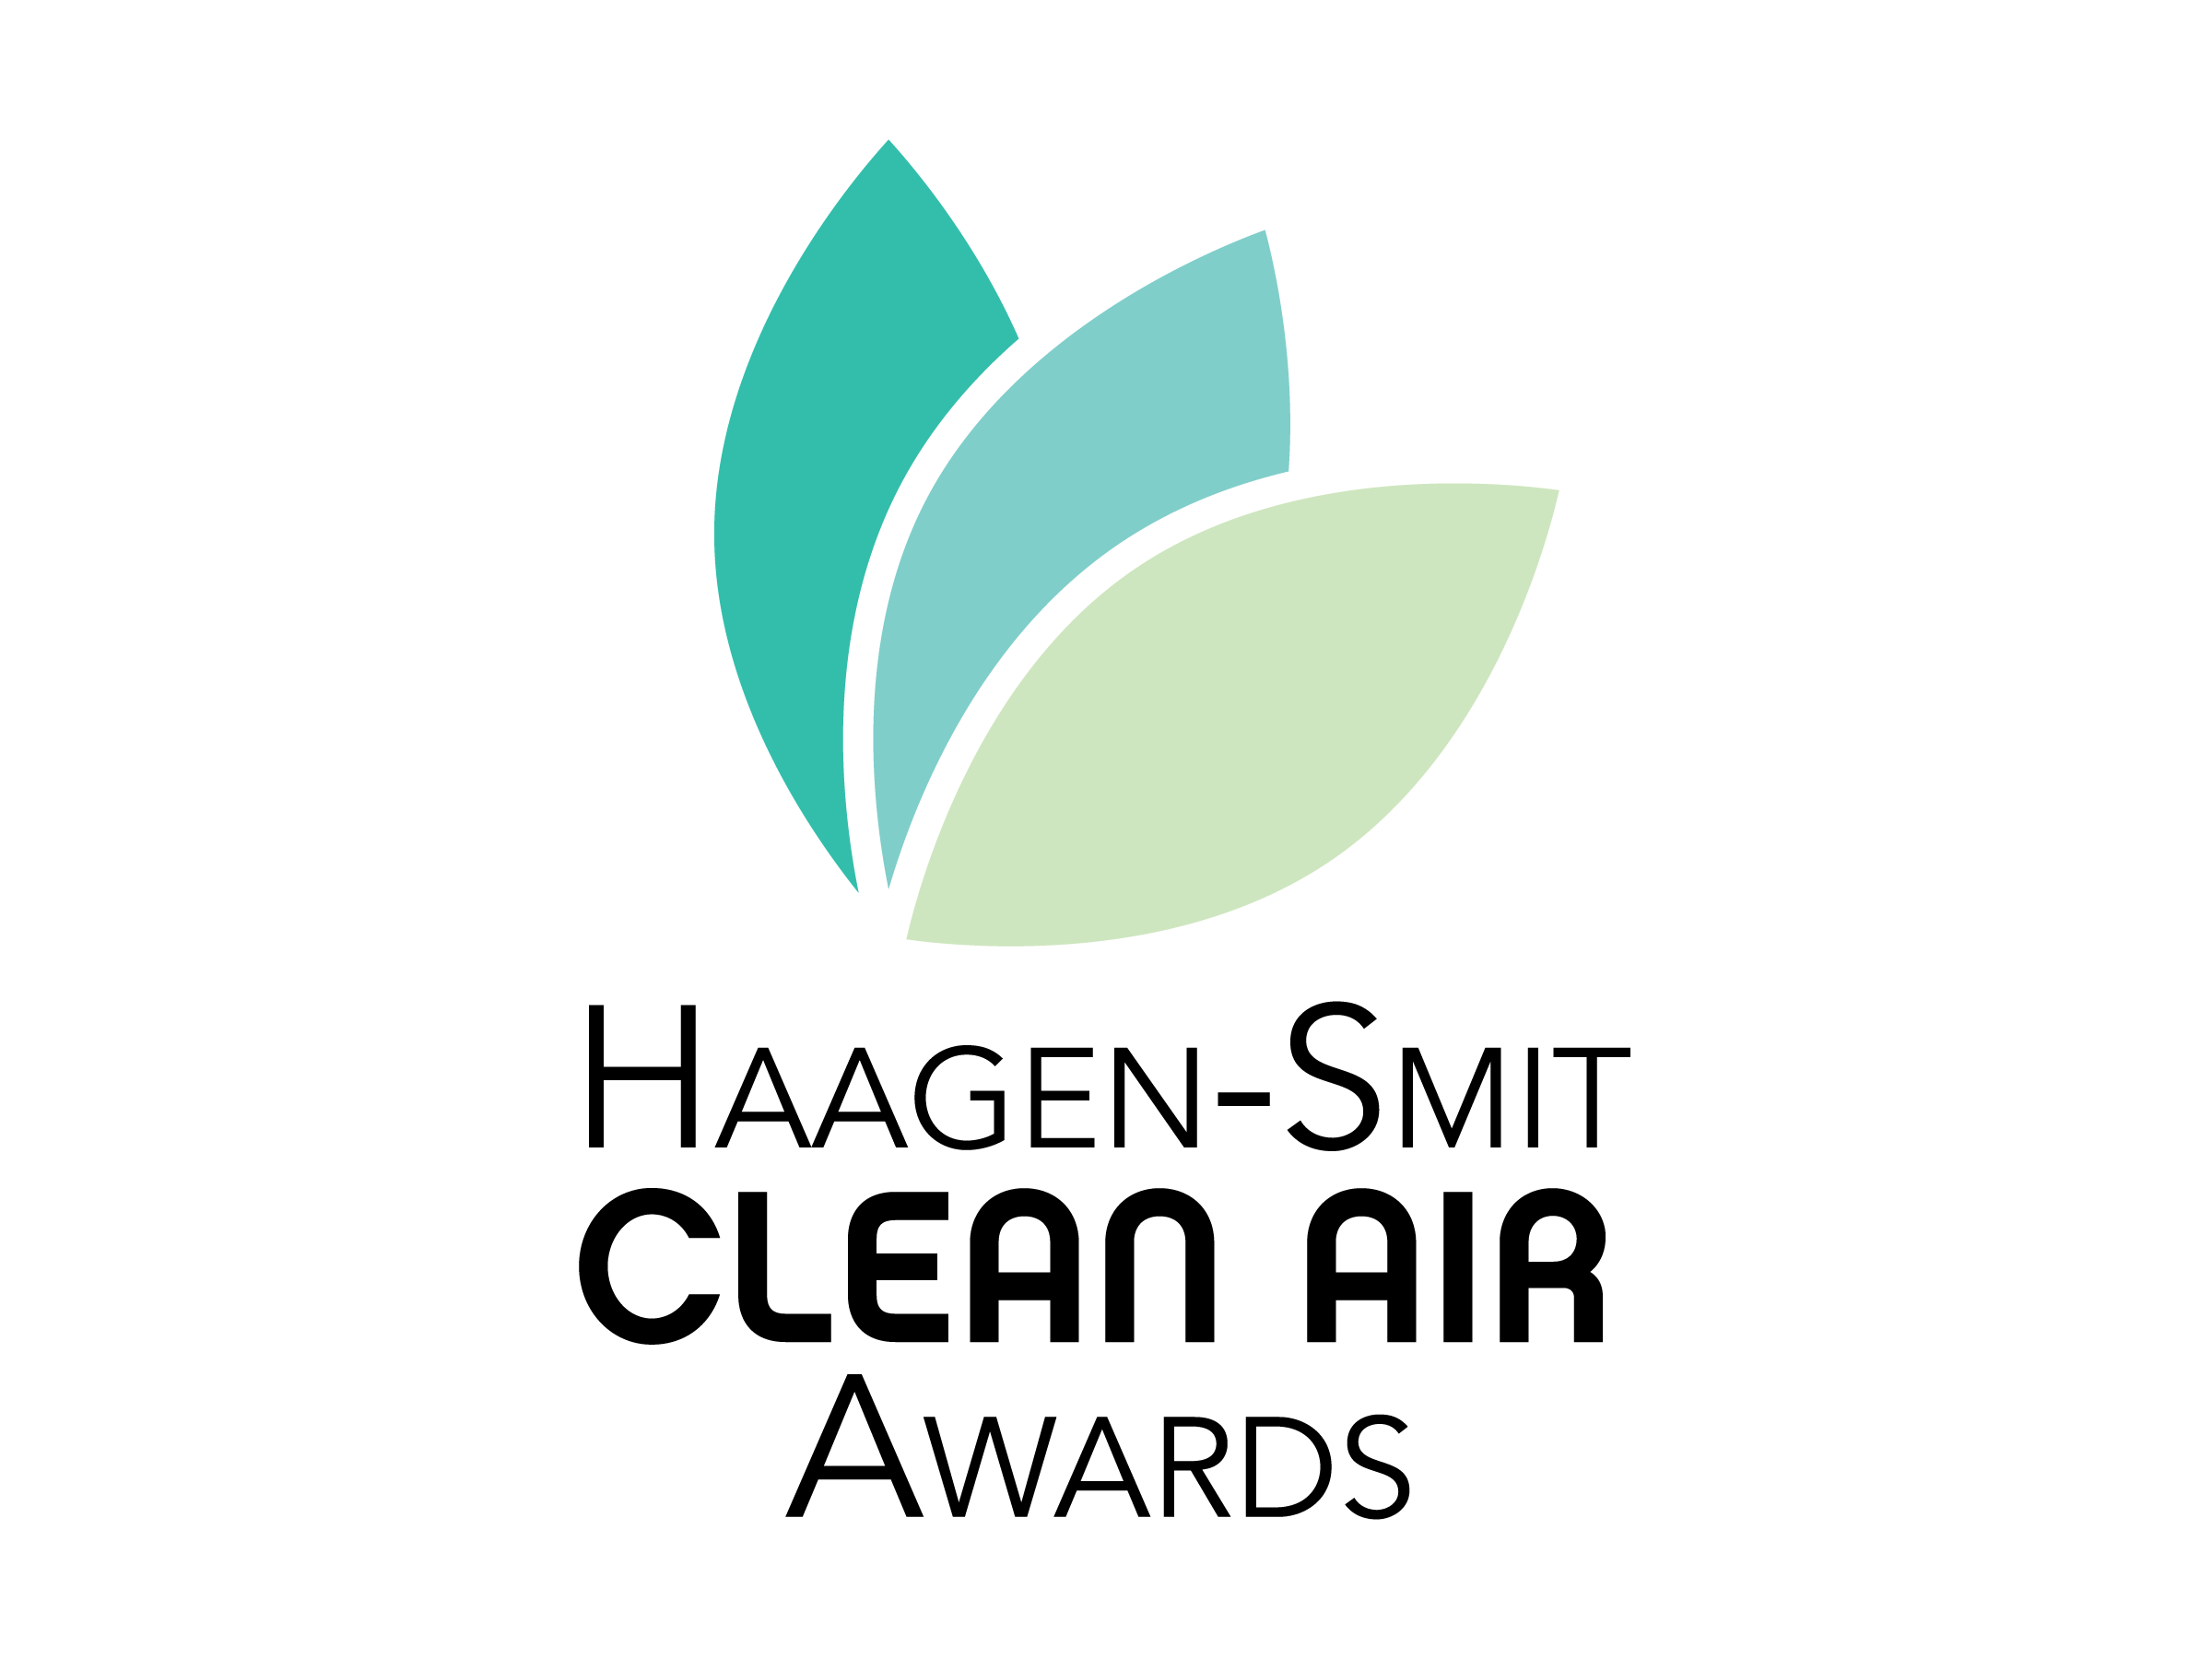 ​  The Haagen-Smit Clean Air Awards logo features a series of California Bay leaves changing color to reflect Dr. Arie Haagen-Smit’s research on plants. His research found that leaves were silvering, bronzing, or bleaching when exposed to smog in Los Angeles.  ​